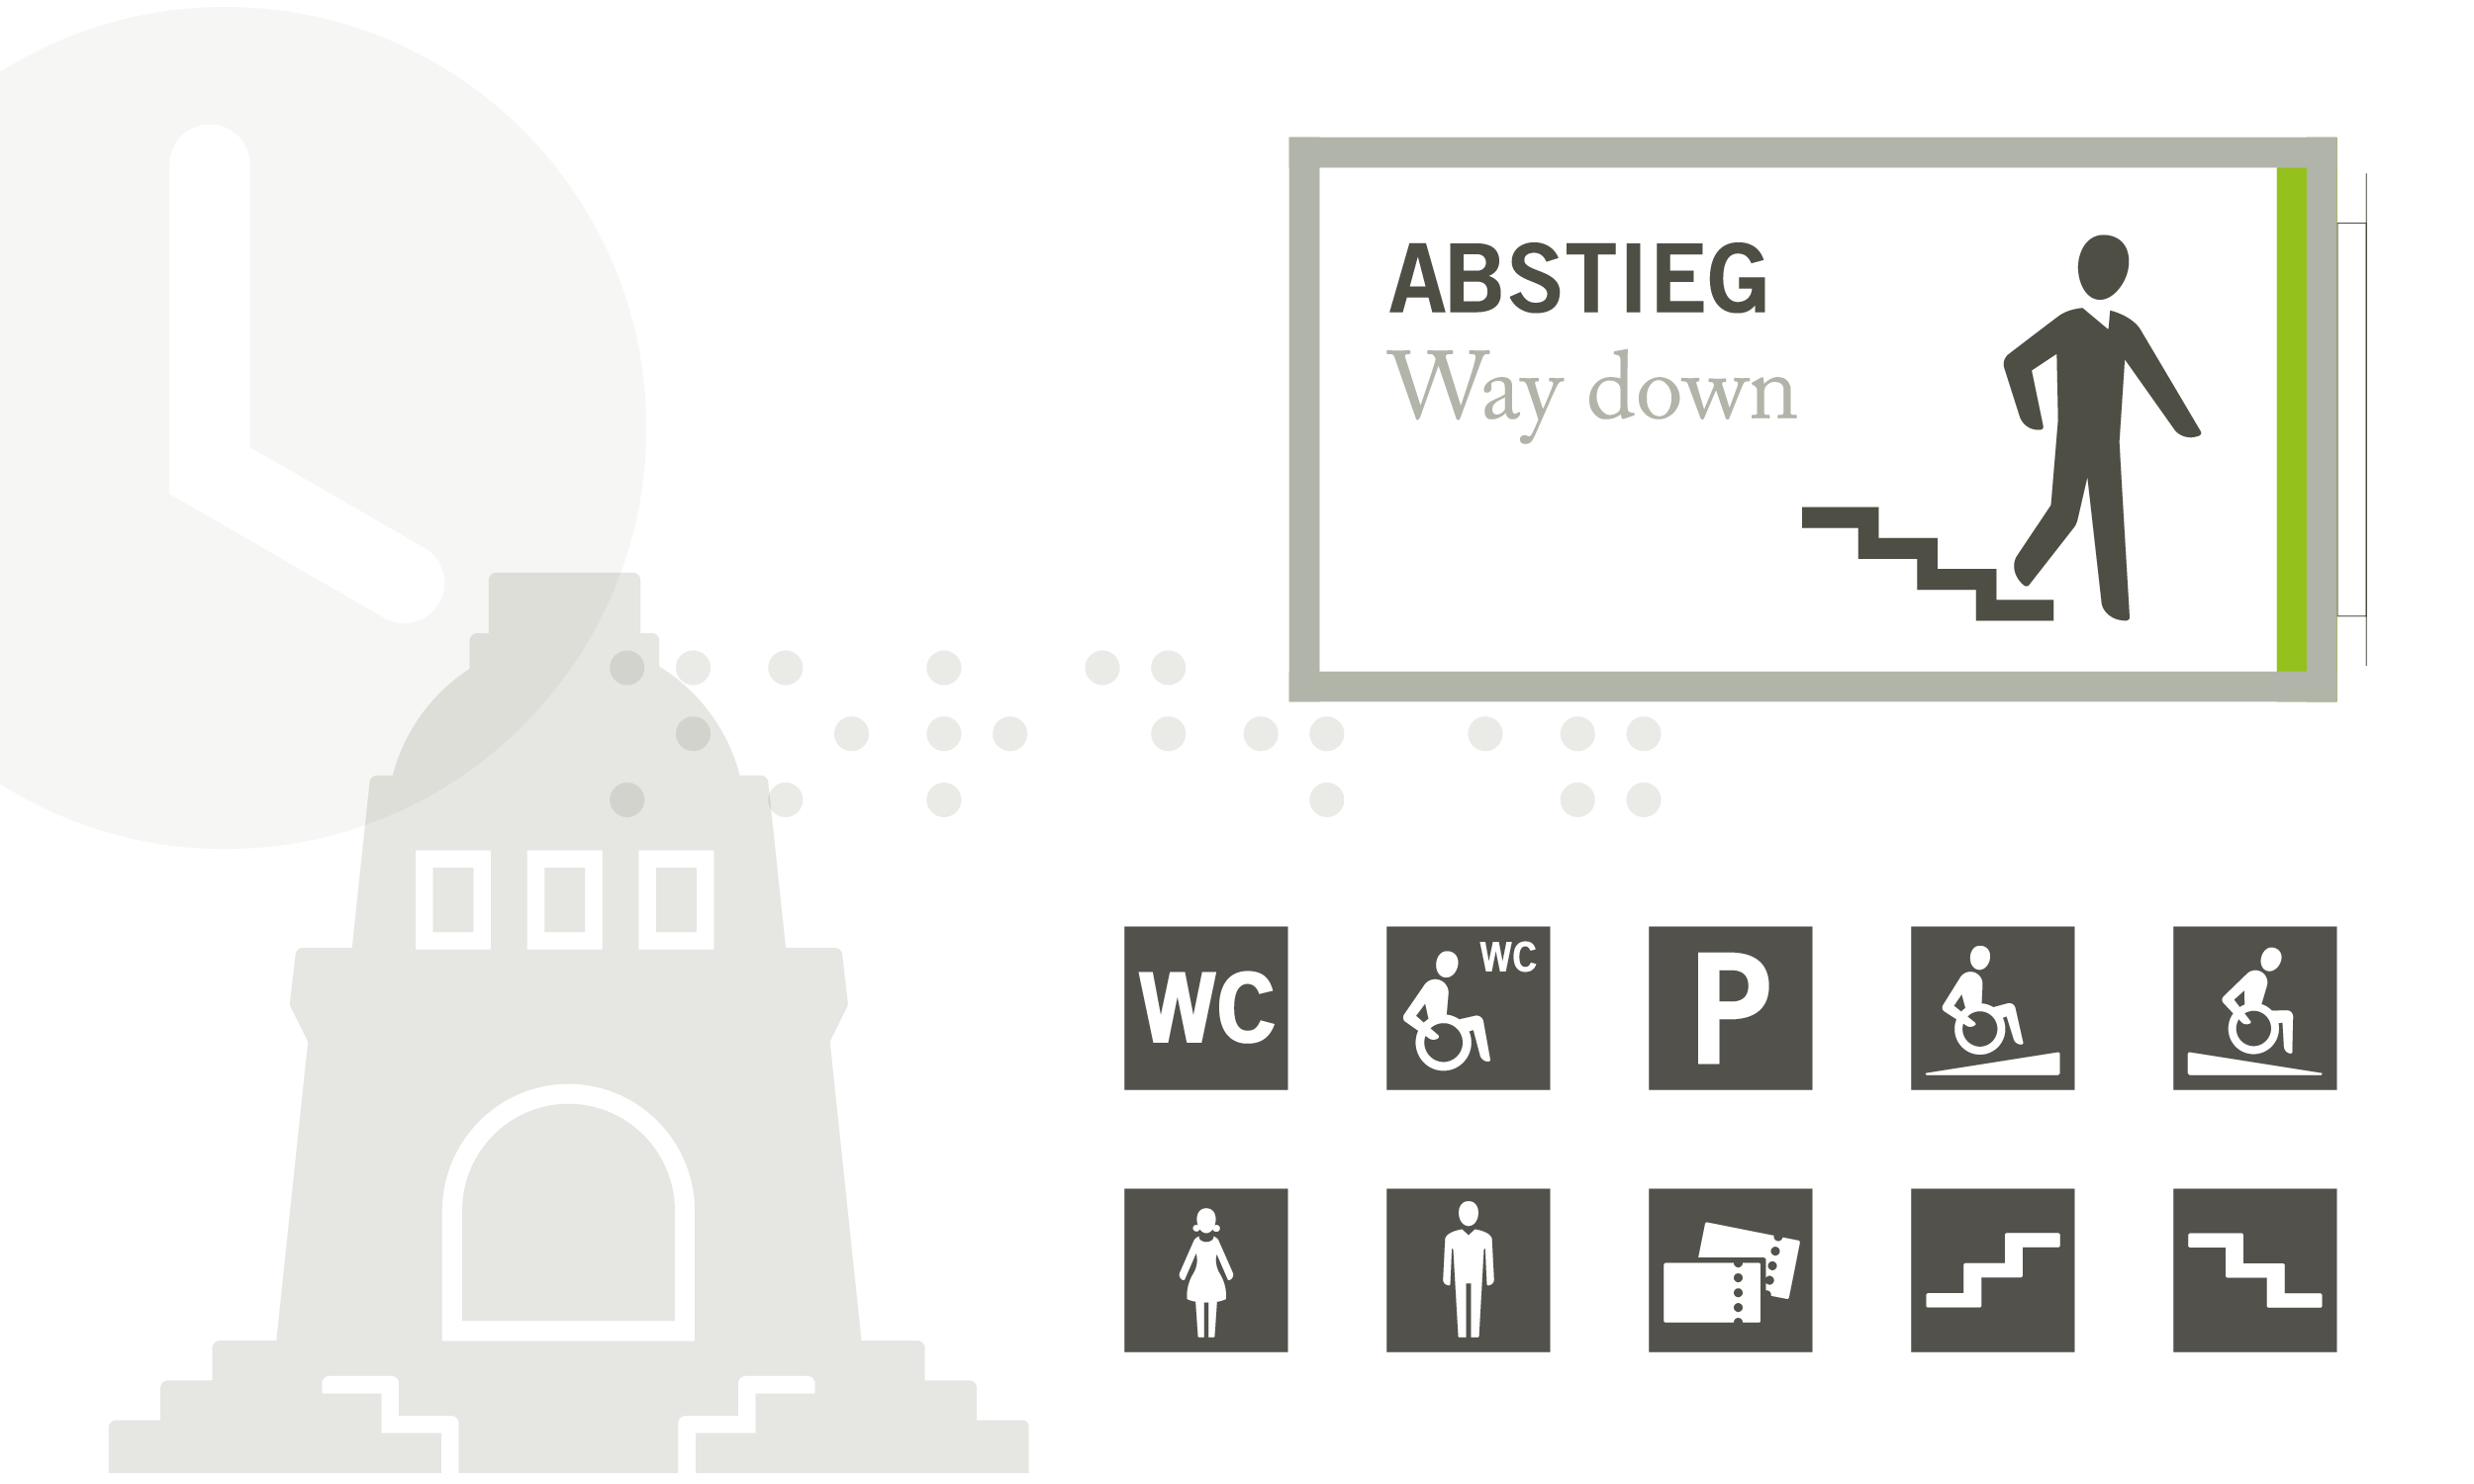 Overview of the pictograms of the orientation system and their application on information boards